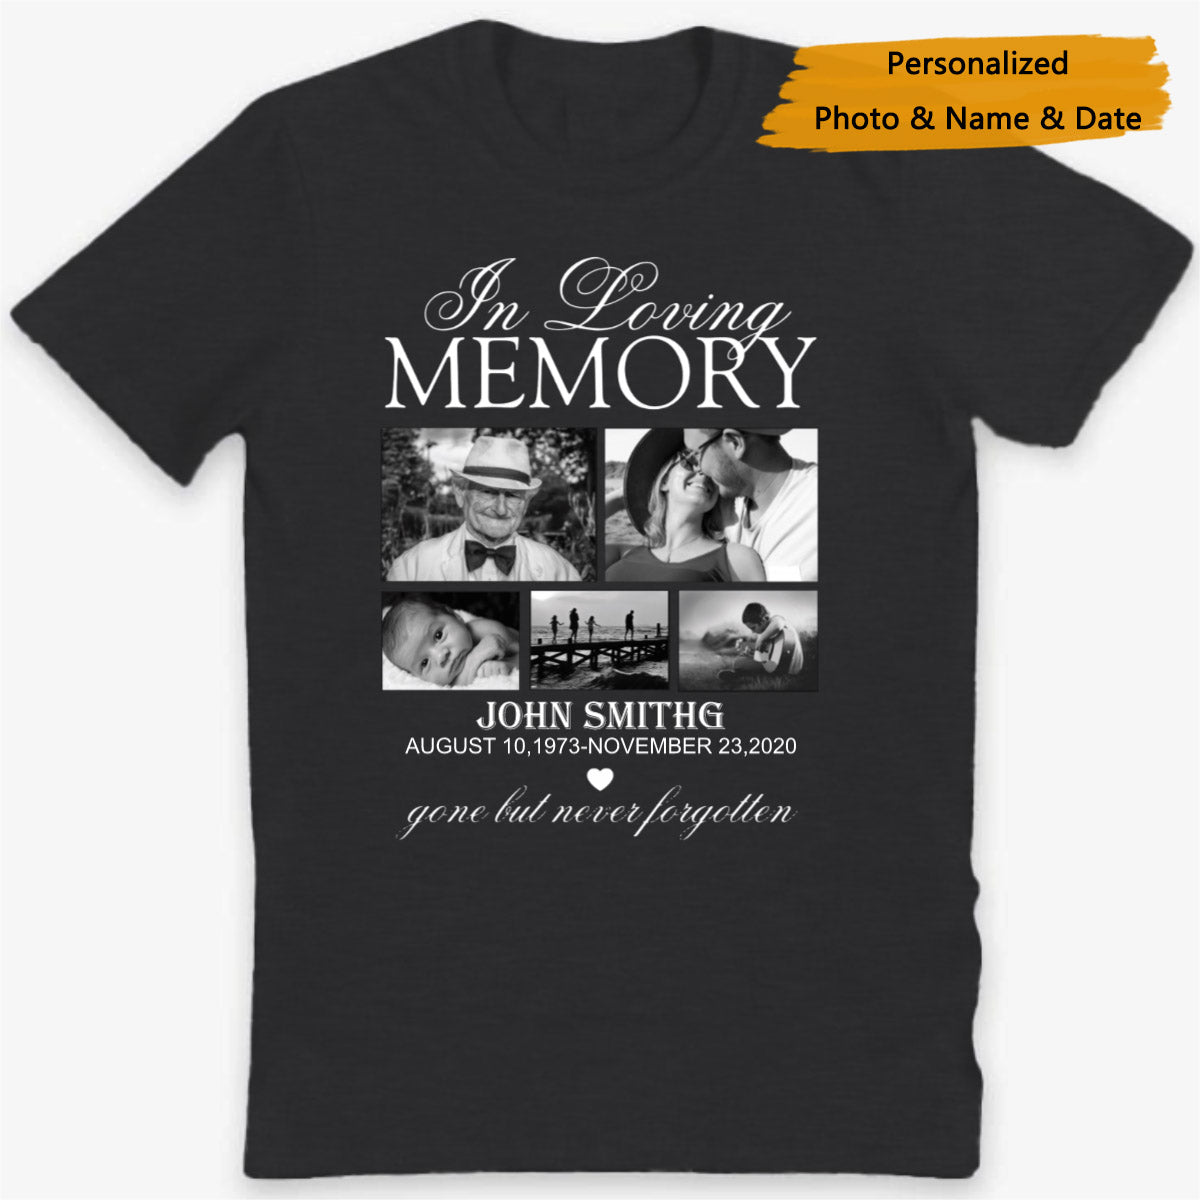 In Loveing Memorial personalized Photo shirt